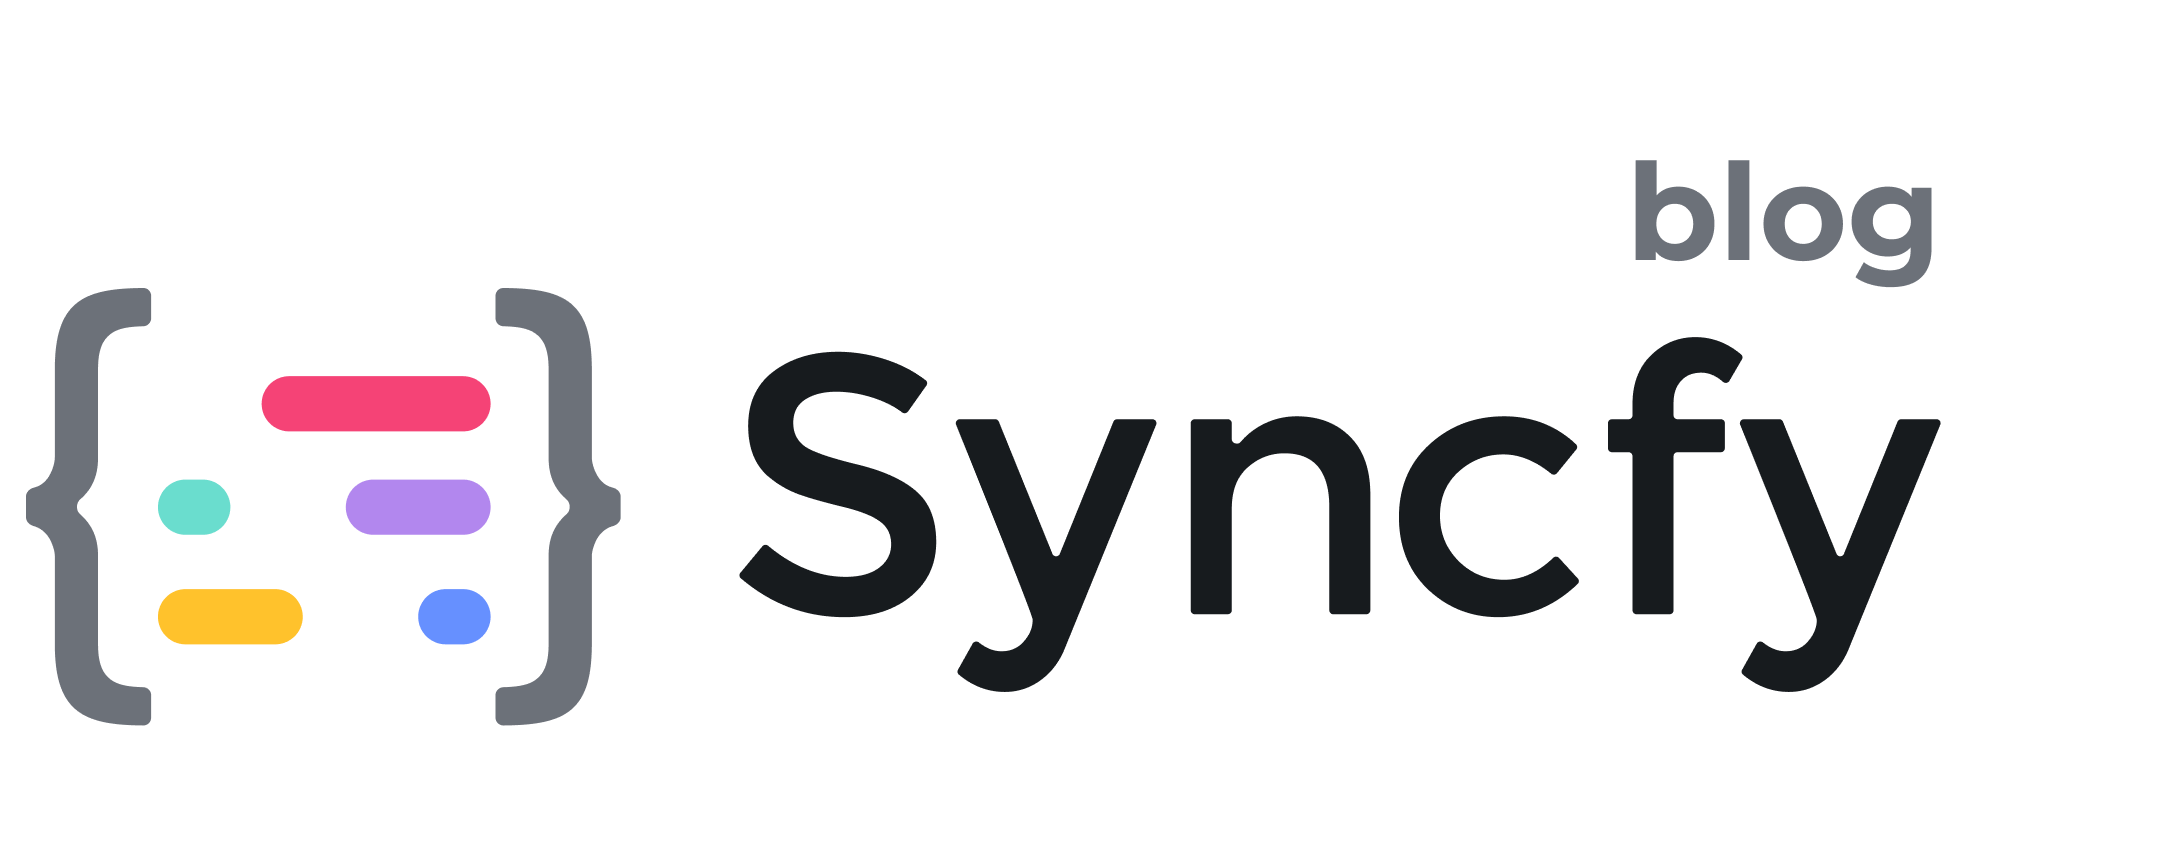 Syncfy is a RESTFul API that empowers companies by providing FinTech services that automate and simplify everyday business operations.